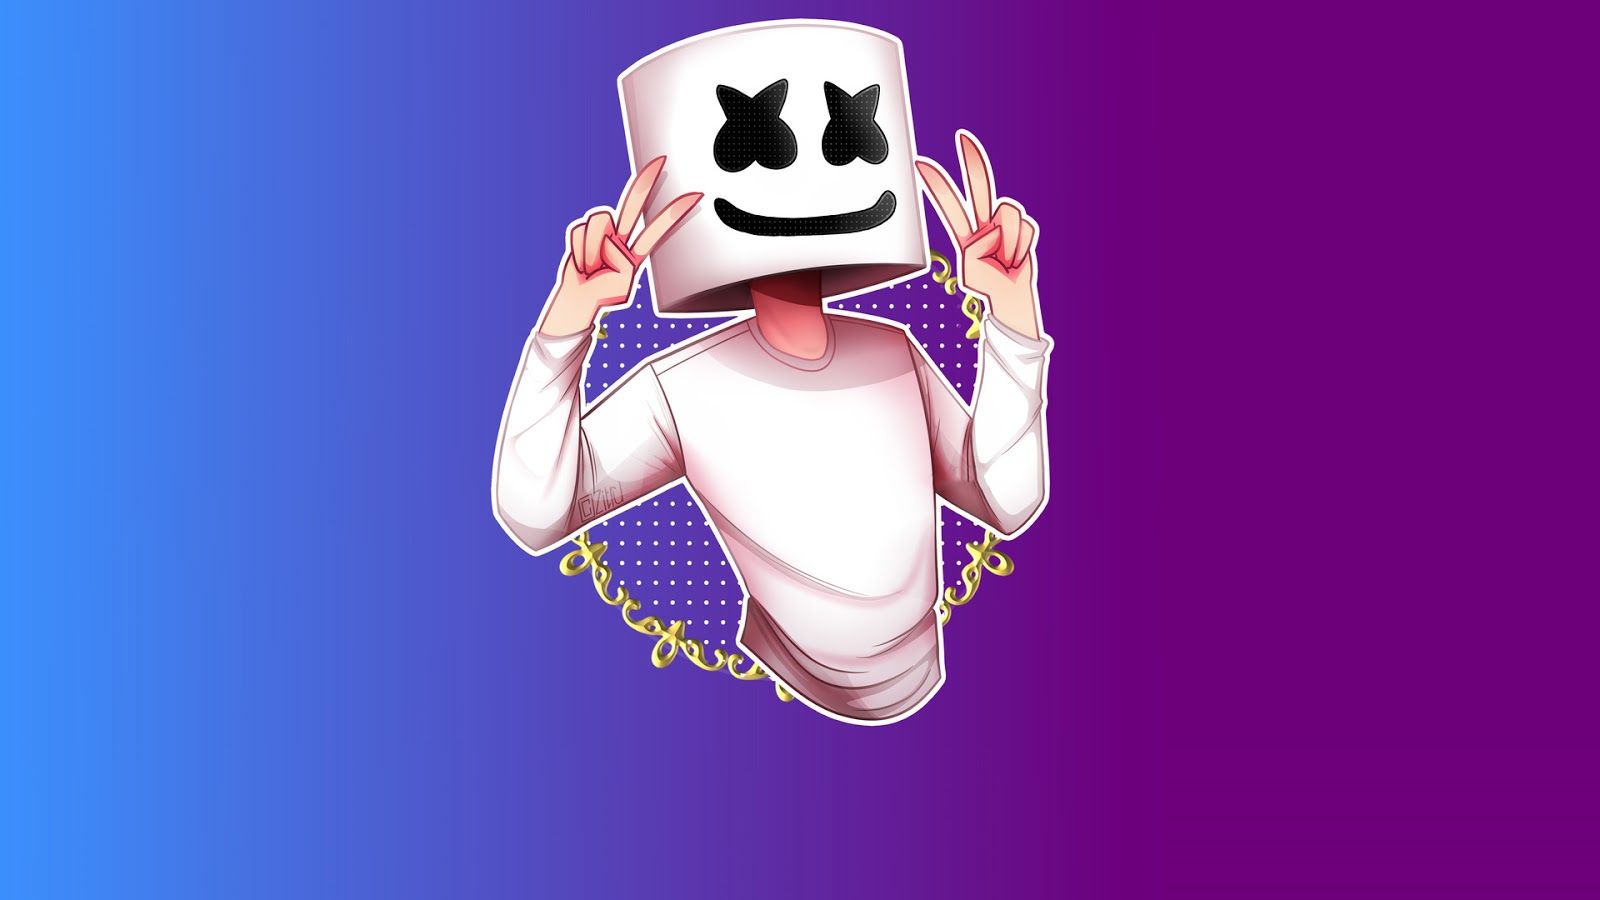 Marshmello Dj Wallpaper Are Available For Download